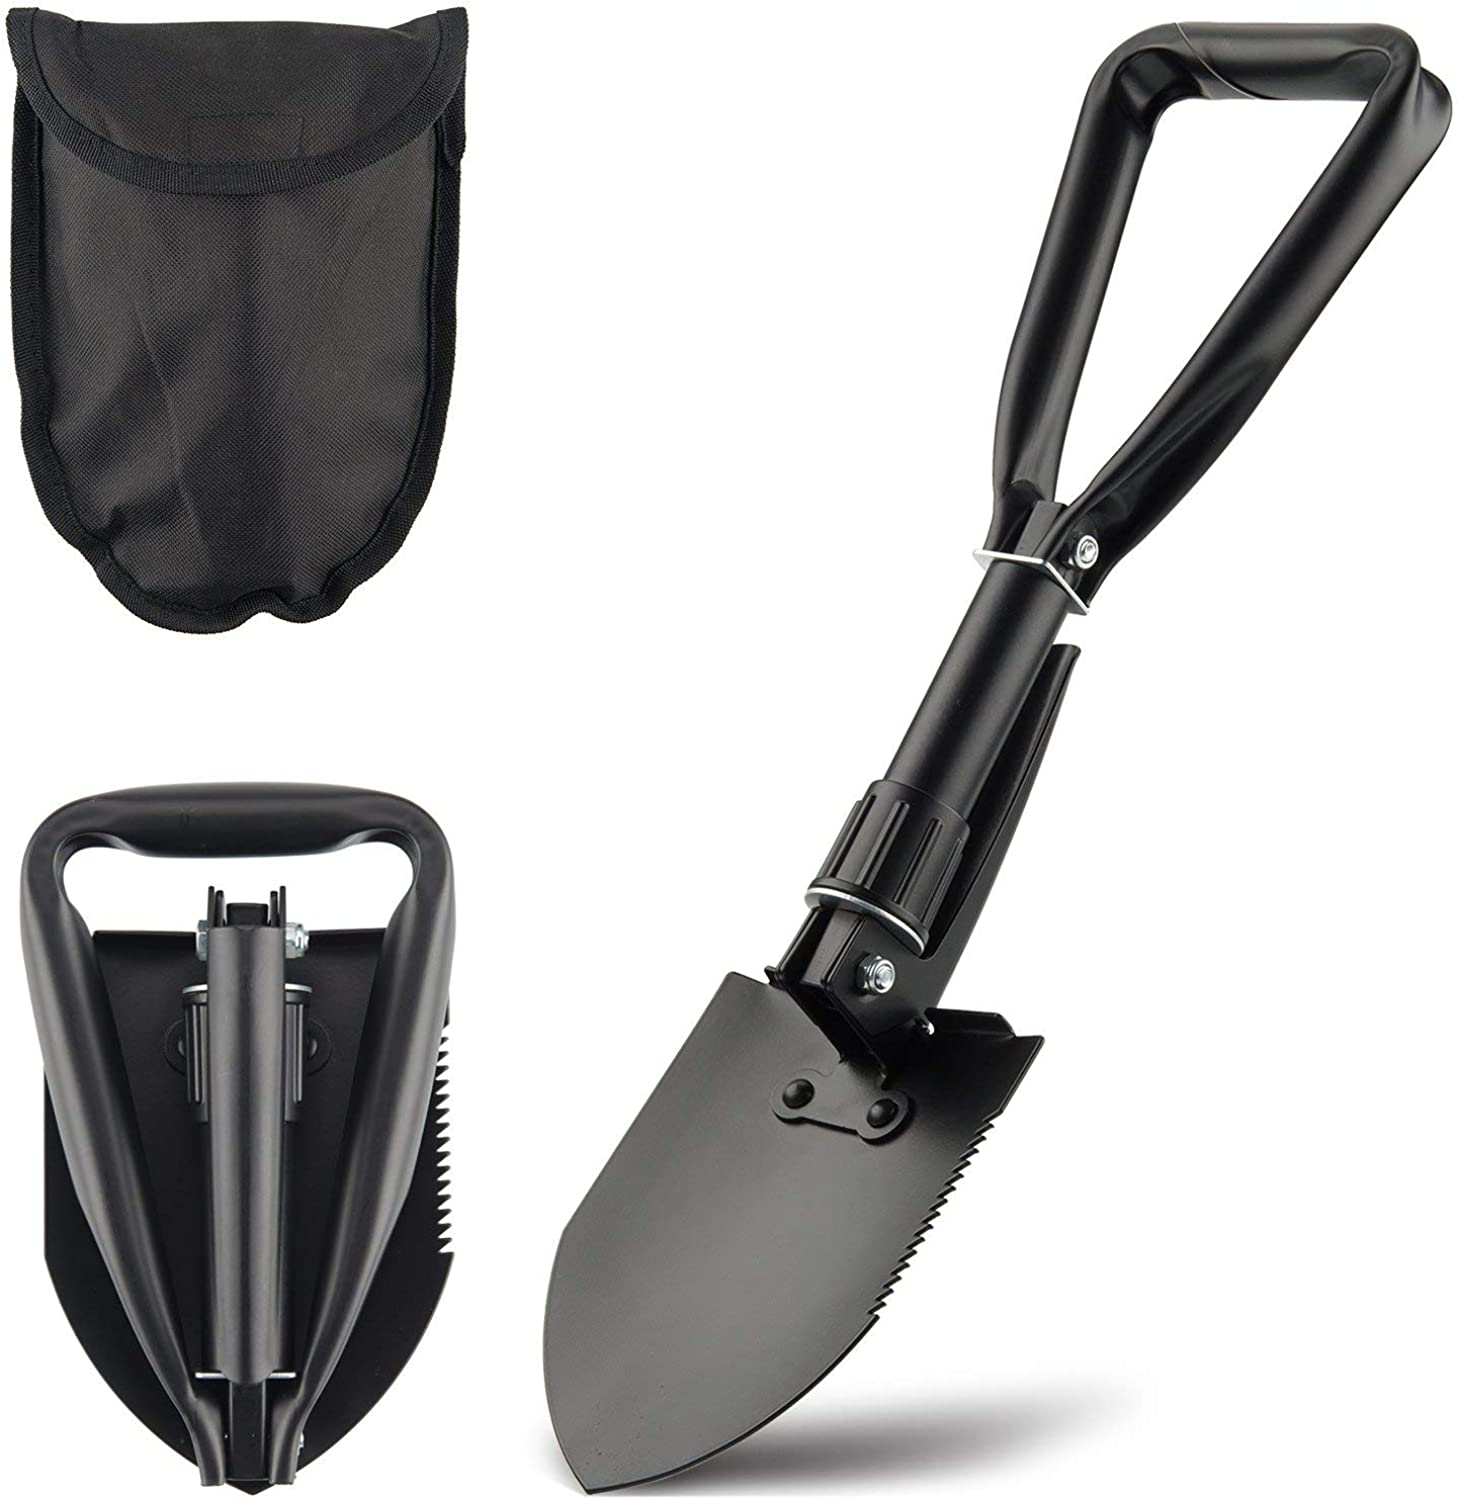 DARTMOOR Mini Folding Shovel High Carbon Steel, Portable Lightweight Outdoor Tactical Survival Foldable Snow Shovel, Entrenching Tool, Camping, Hiking, Digging, Backpacking, Car Emergency